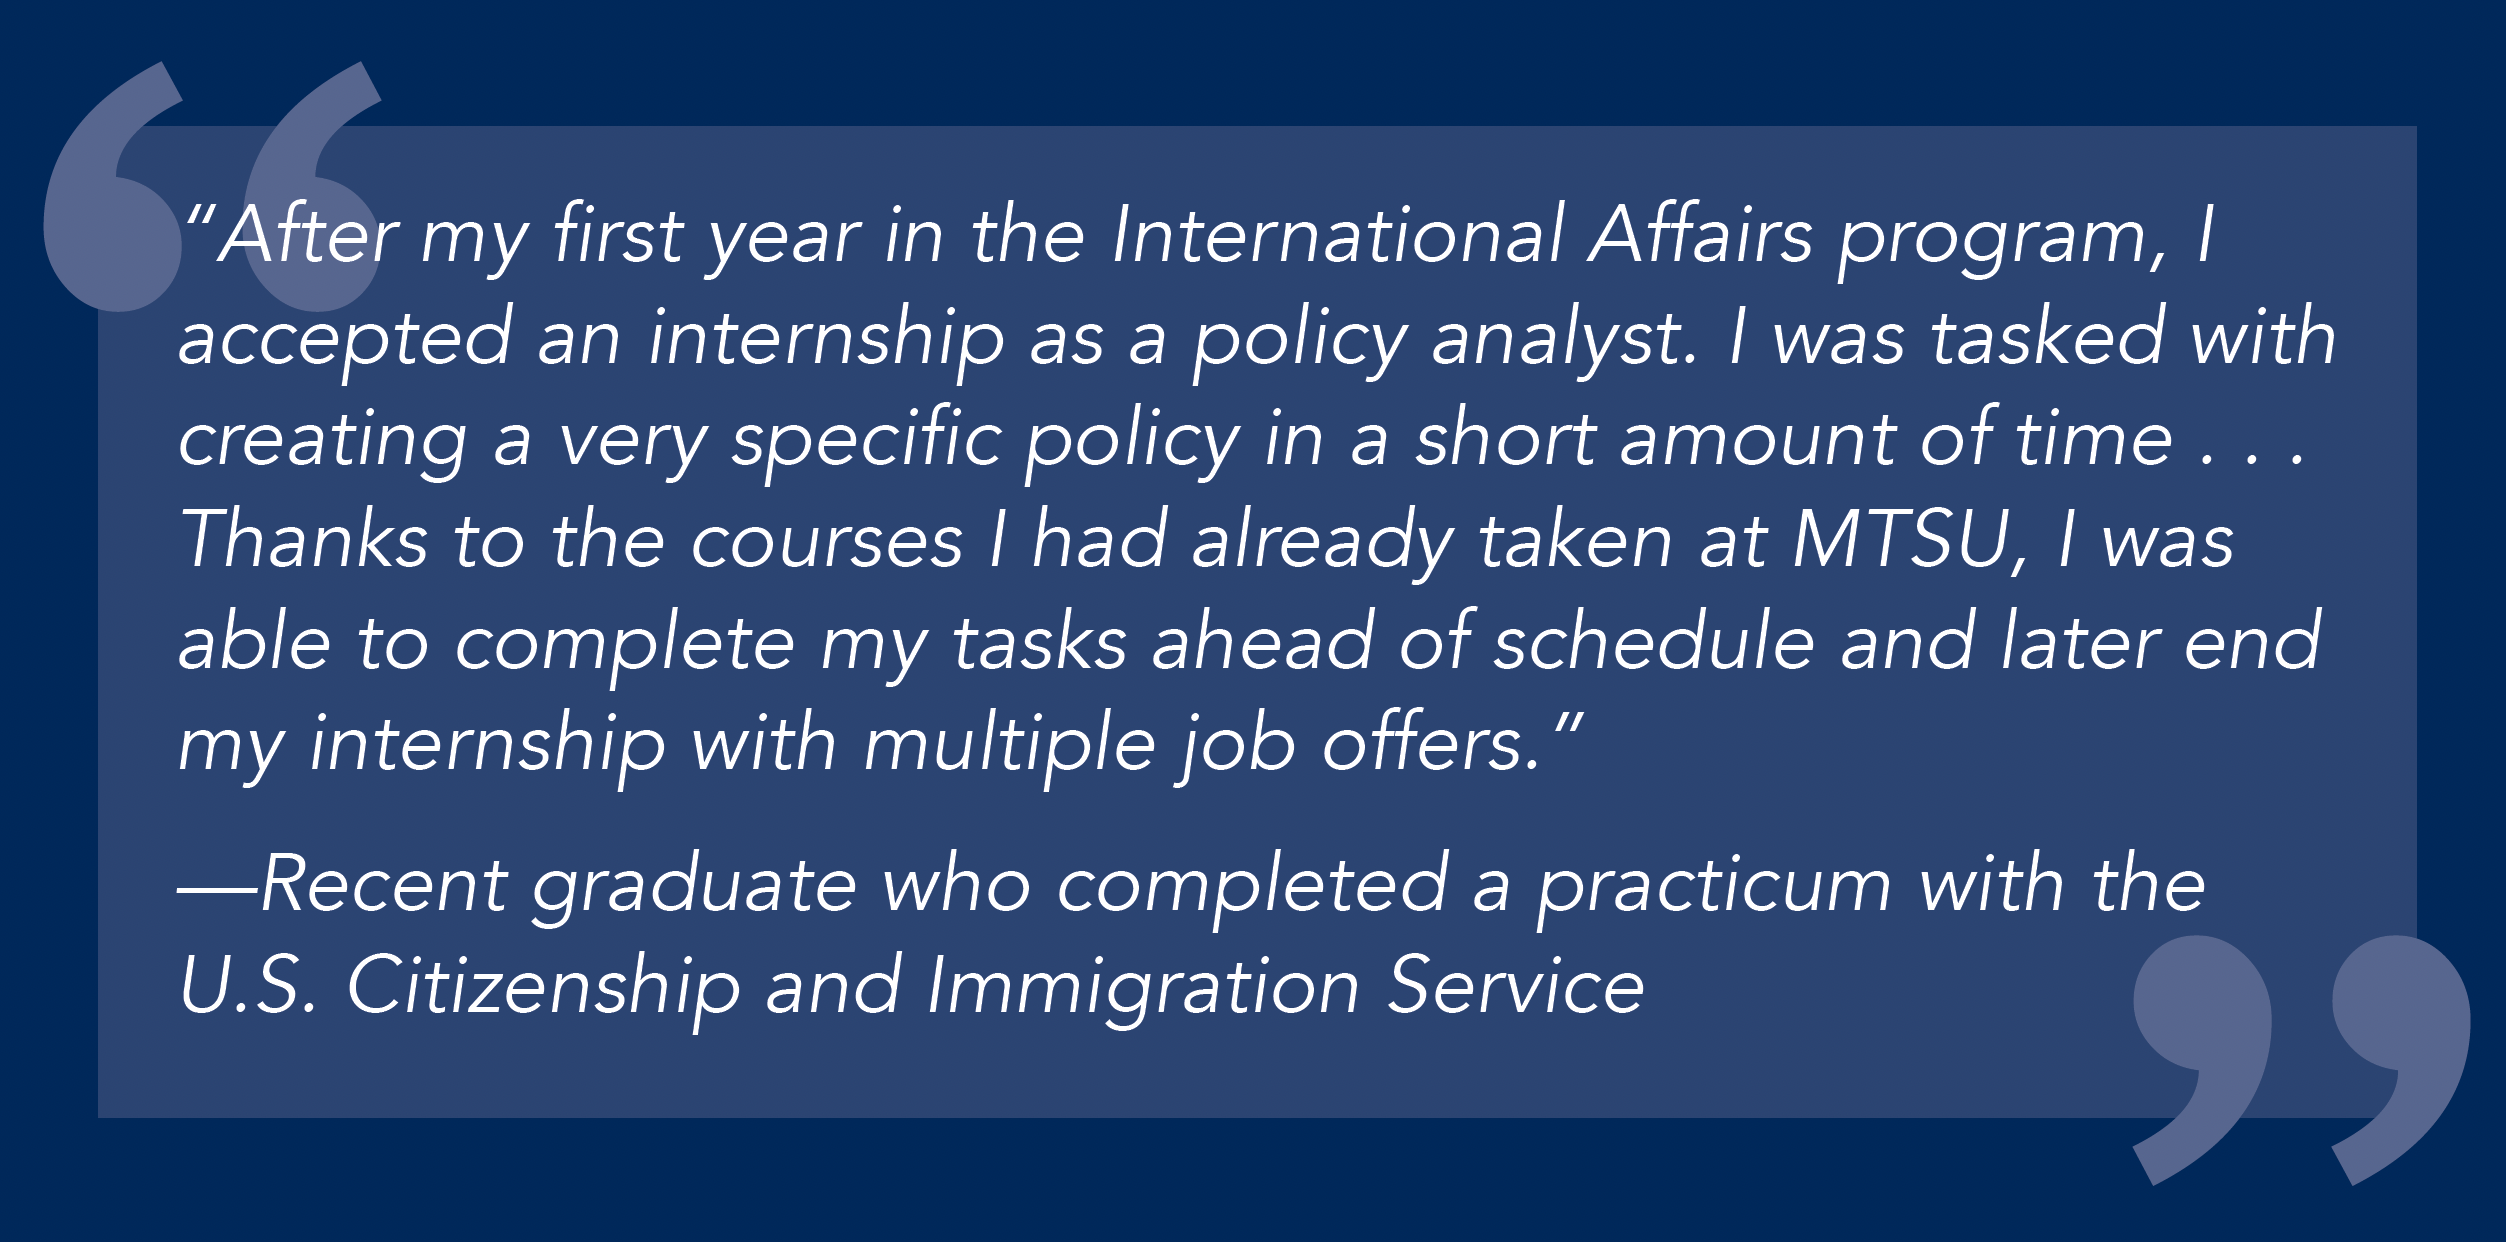 “After my first year in the International Affairs program, I accepted an internship as a policy analyst. I was tasked with creating a very specific policy in a short amount of time . . . Thanks to the courses I had already taken at MTSU, I was able to complete my tasks ahead of schedule and later end my internship with multiple job offers.” —Recent graduate who completed a practicum with the U.S. Citizenship and Immigration Service